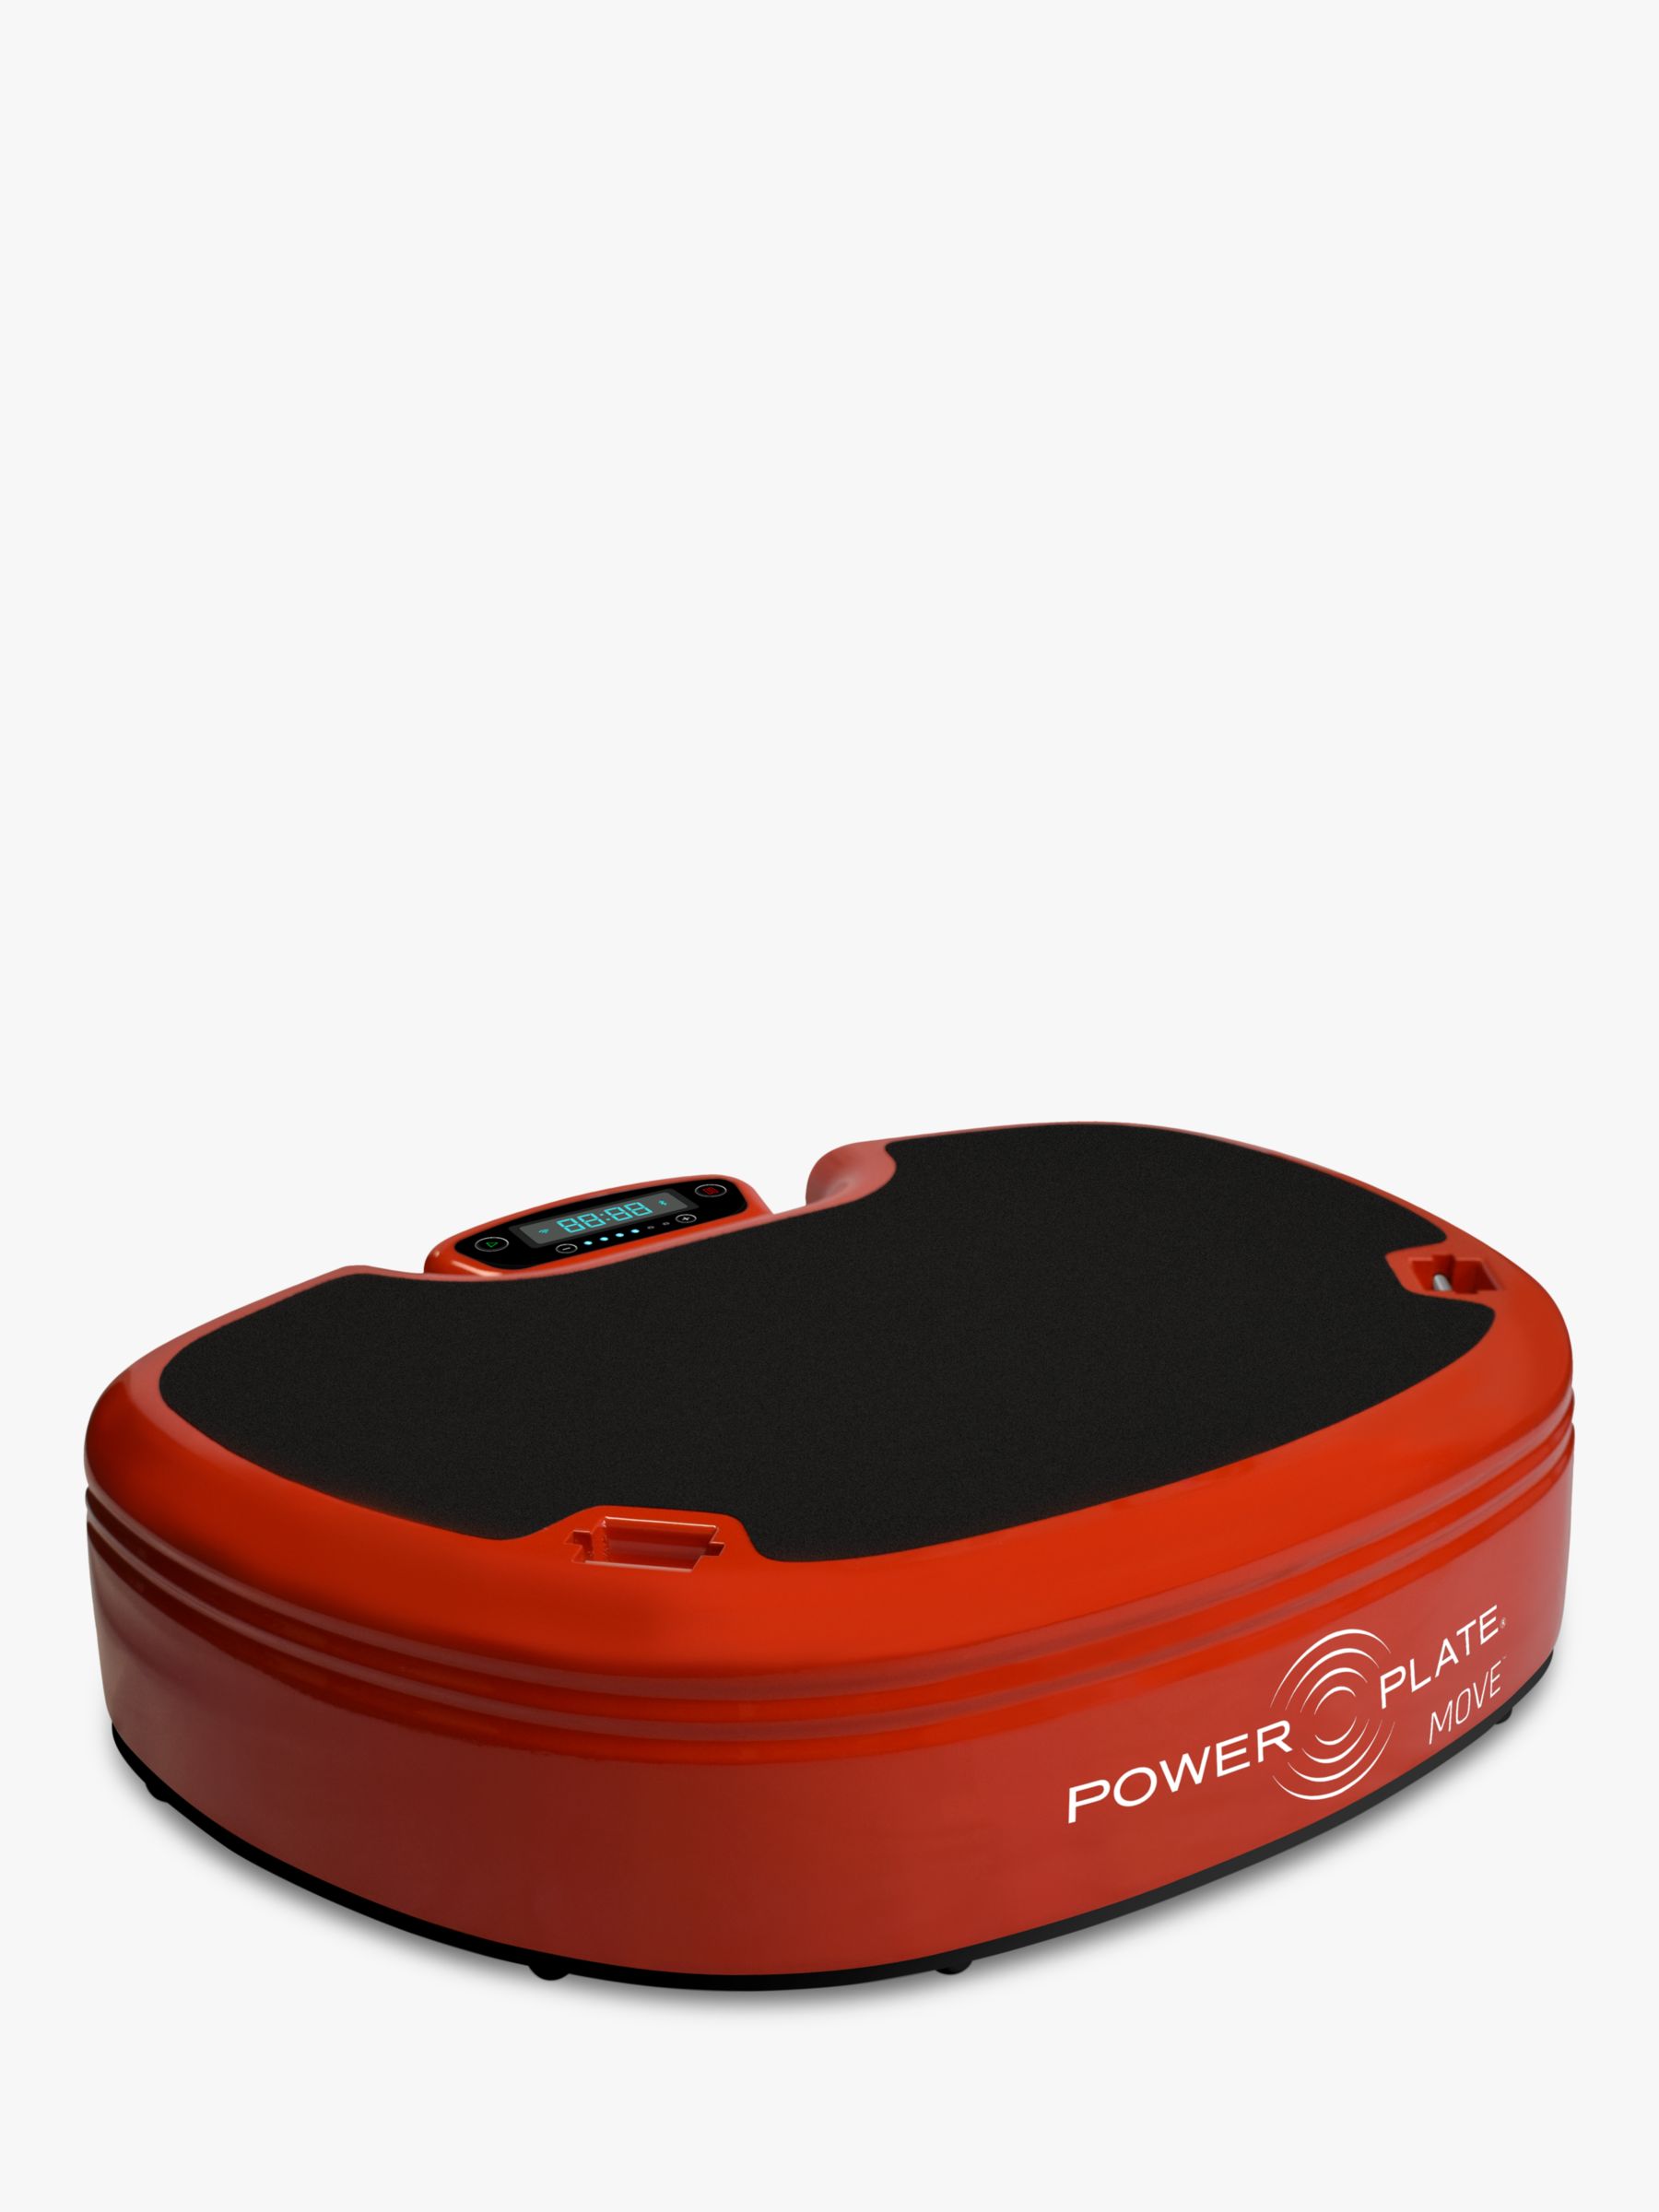 Power Plate MOVE Vibration Plate, Red